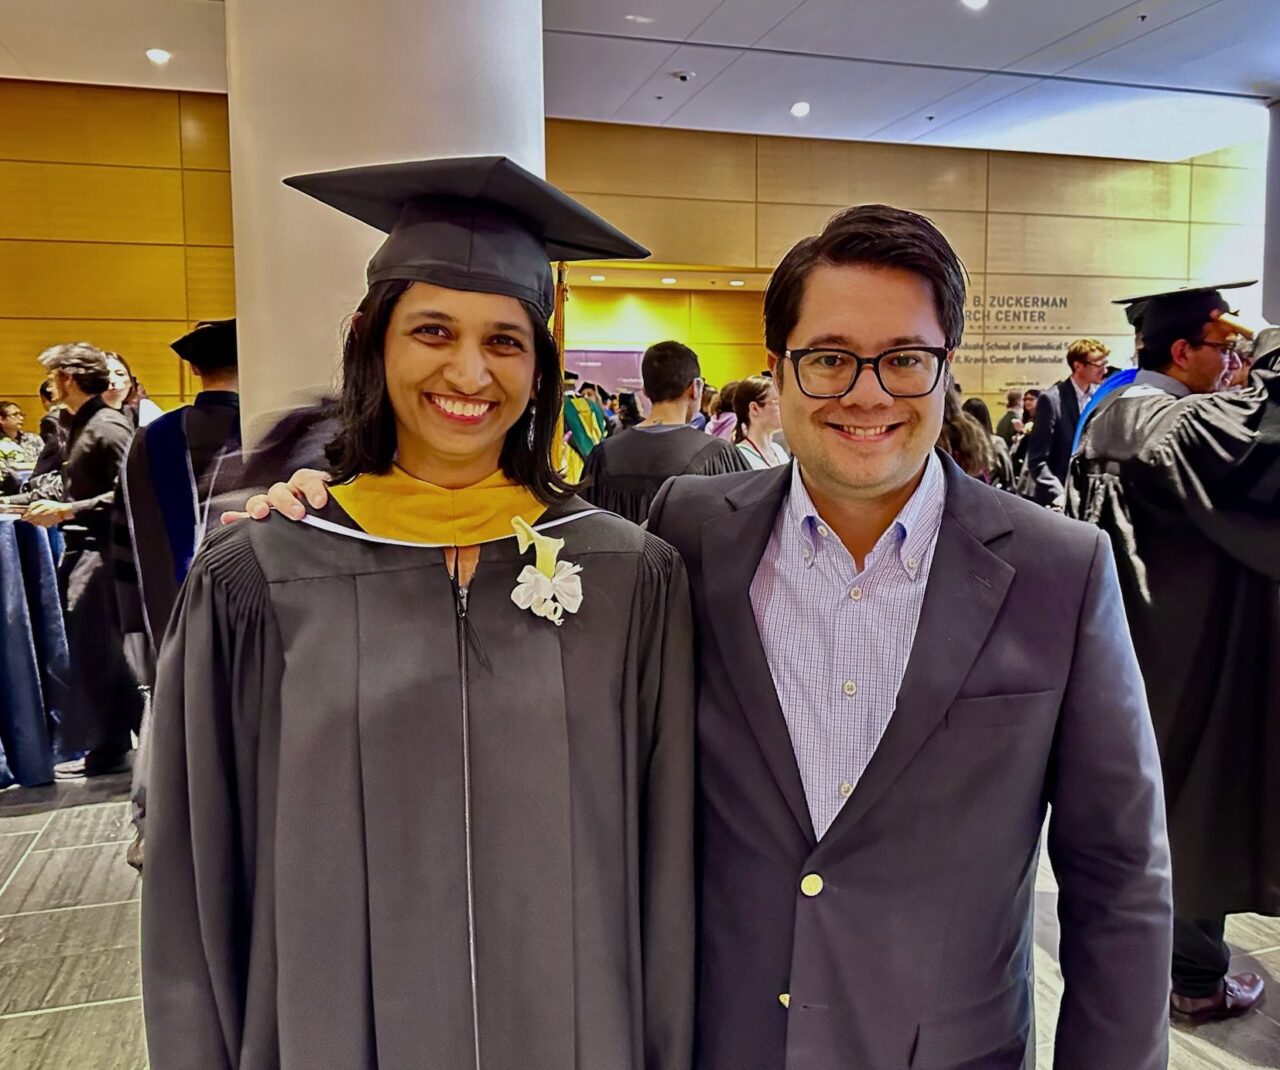 Urvi Shah: Excited to complete masters in clinical and translational cancer research as part of the K12 program